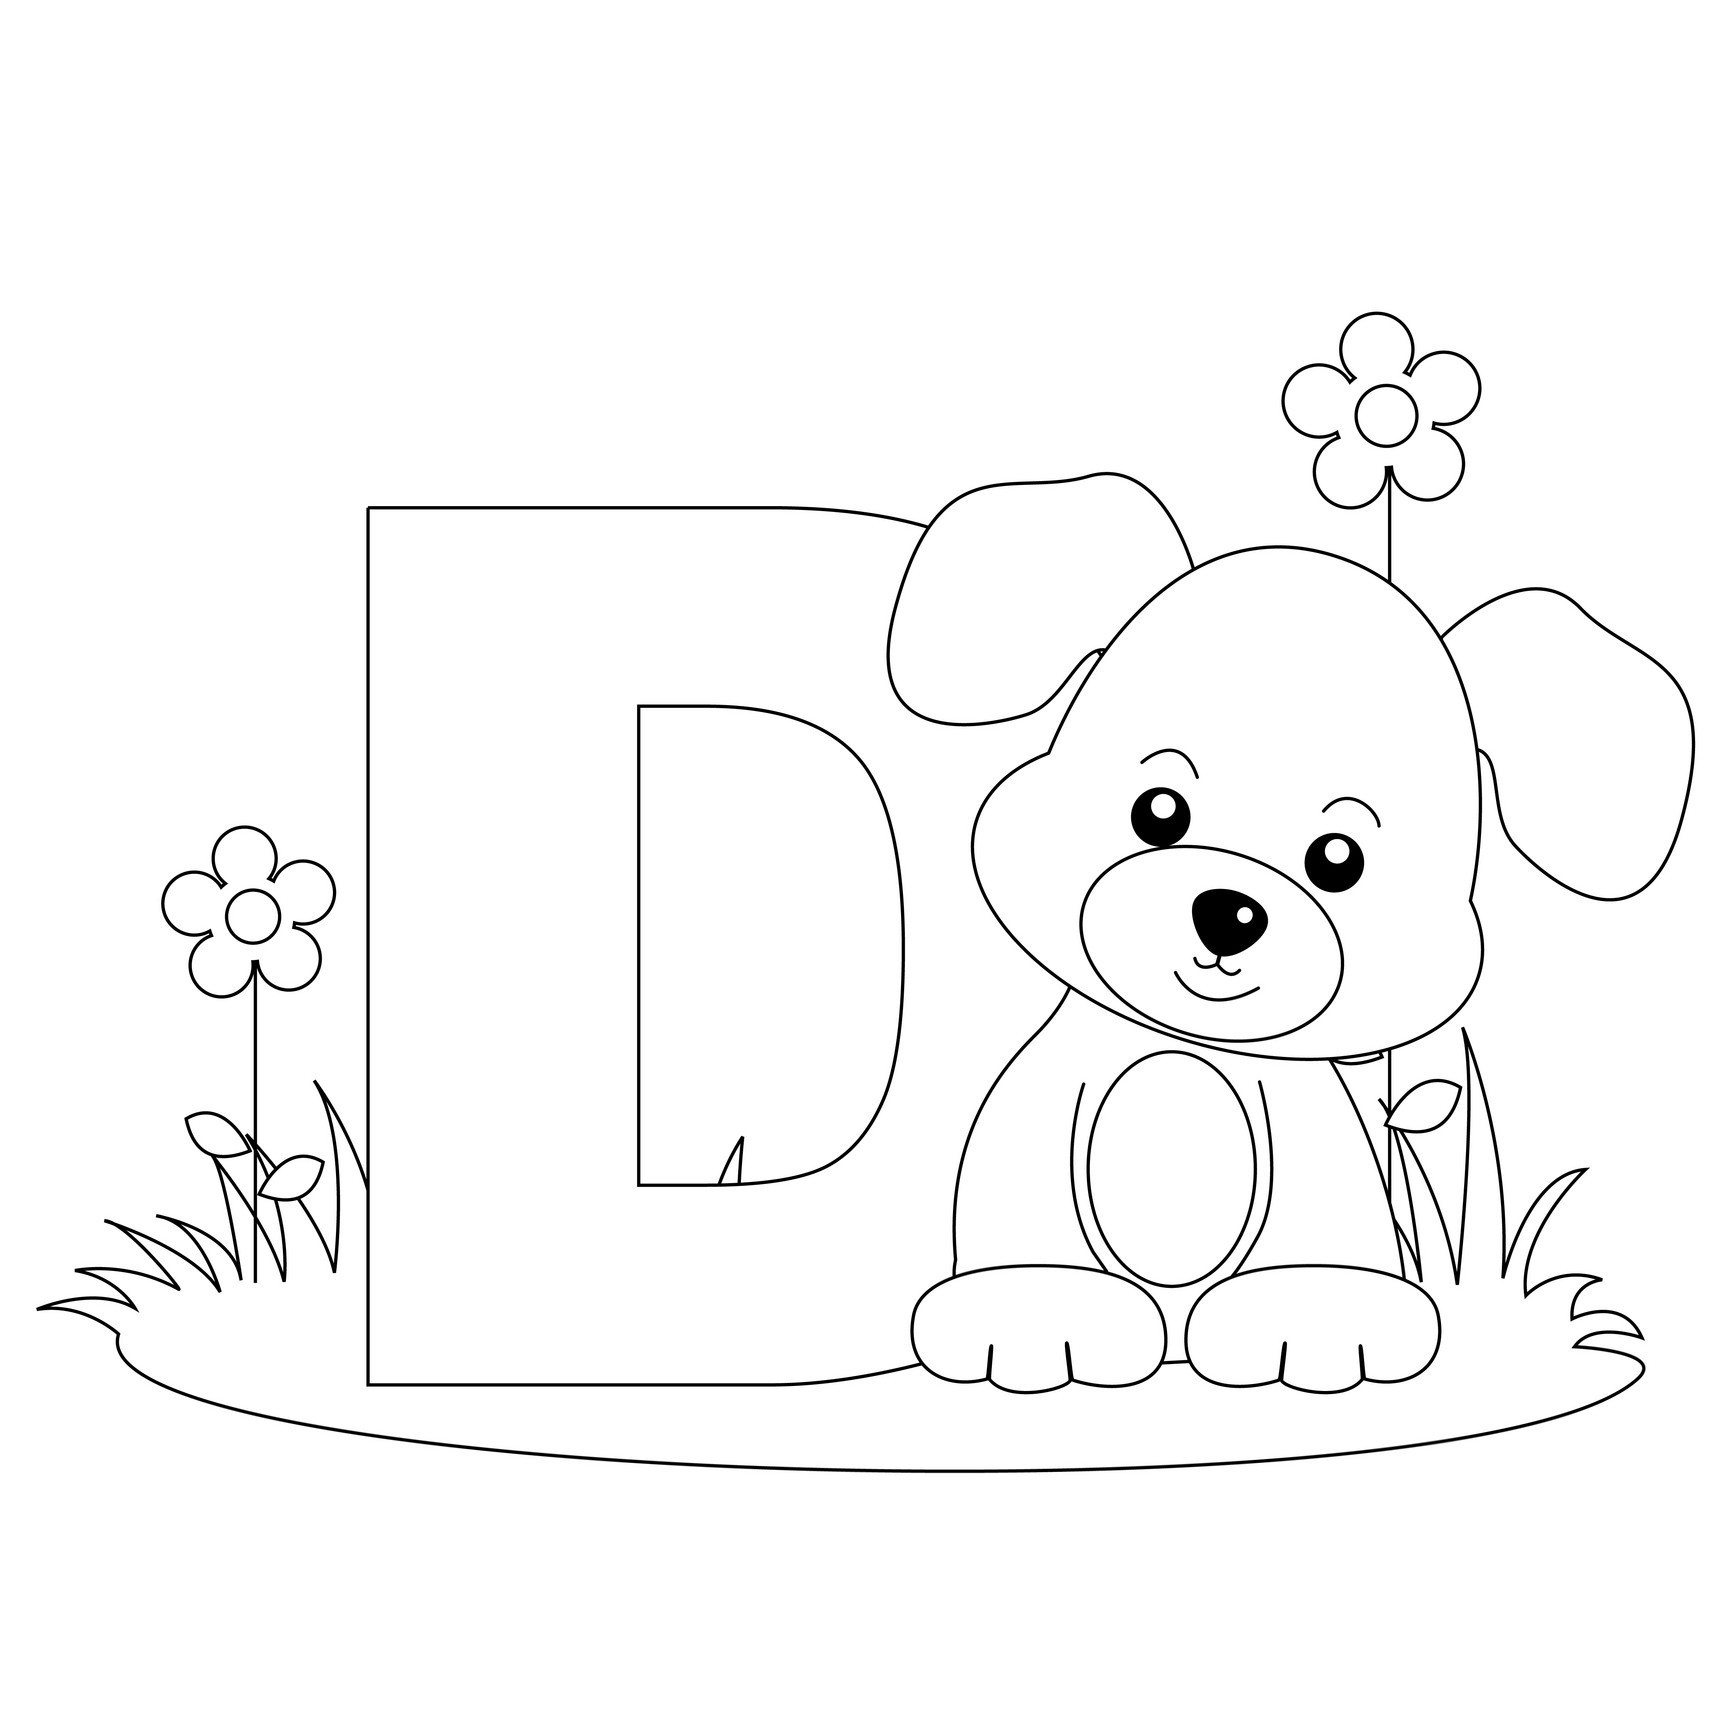 Letter D Coloring Pages For Toddlers
 Free Printable Alphabet Coloring Pages for Kids Best